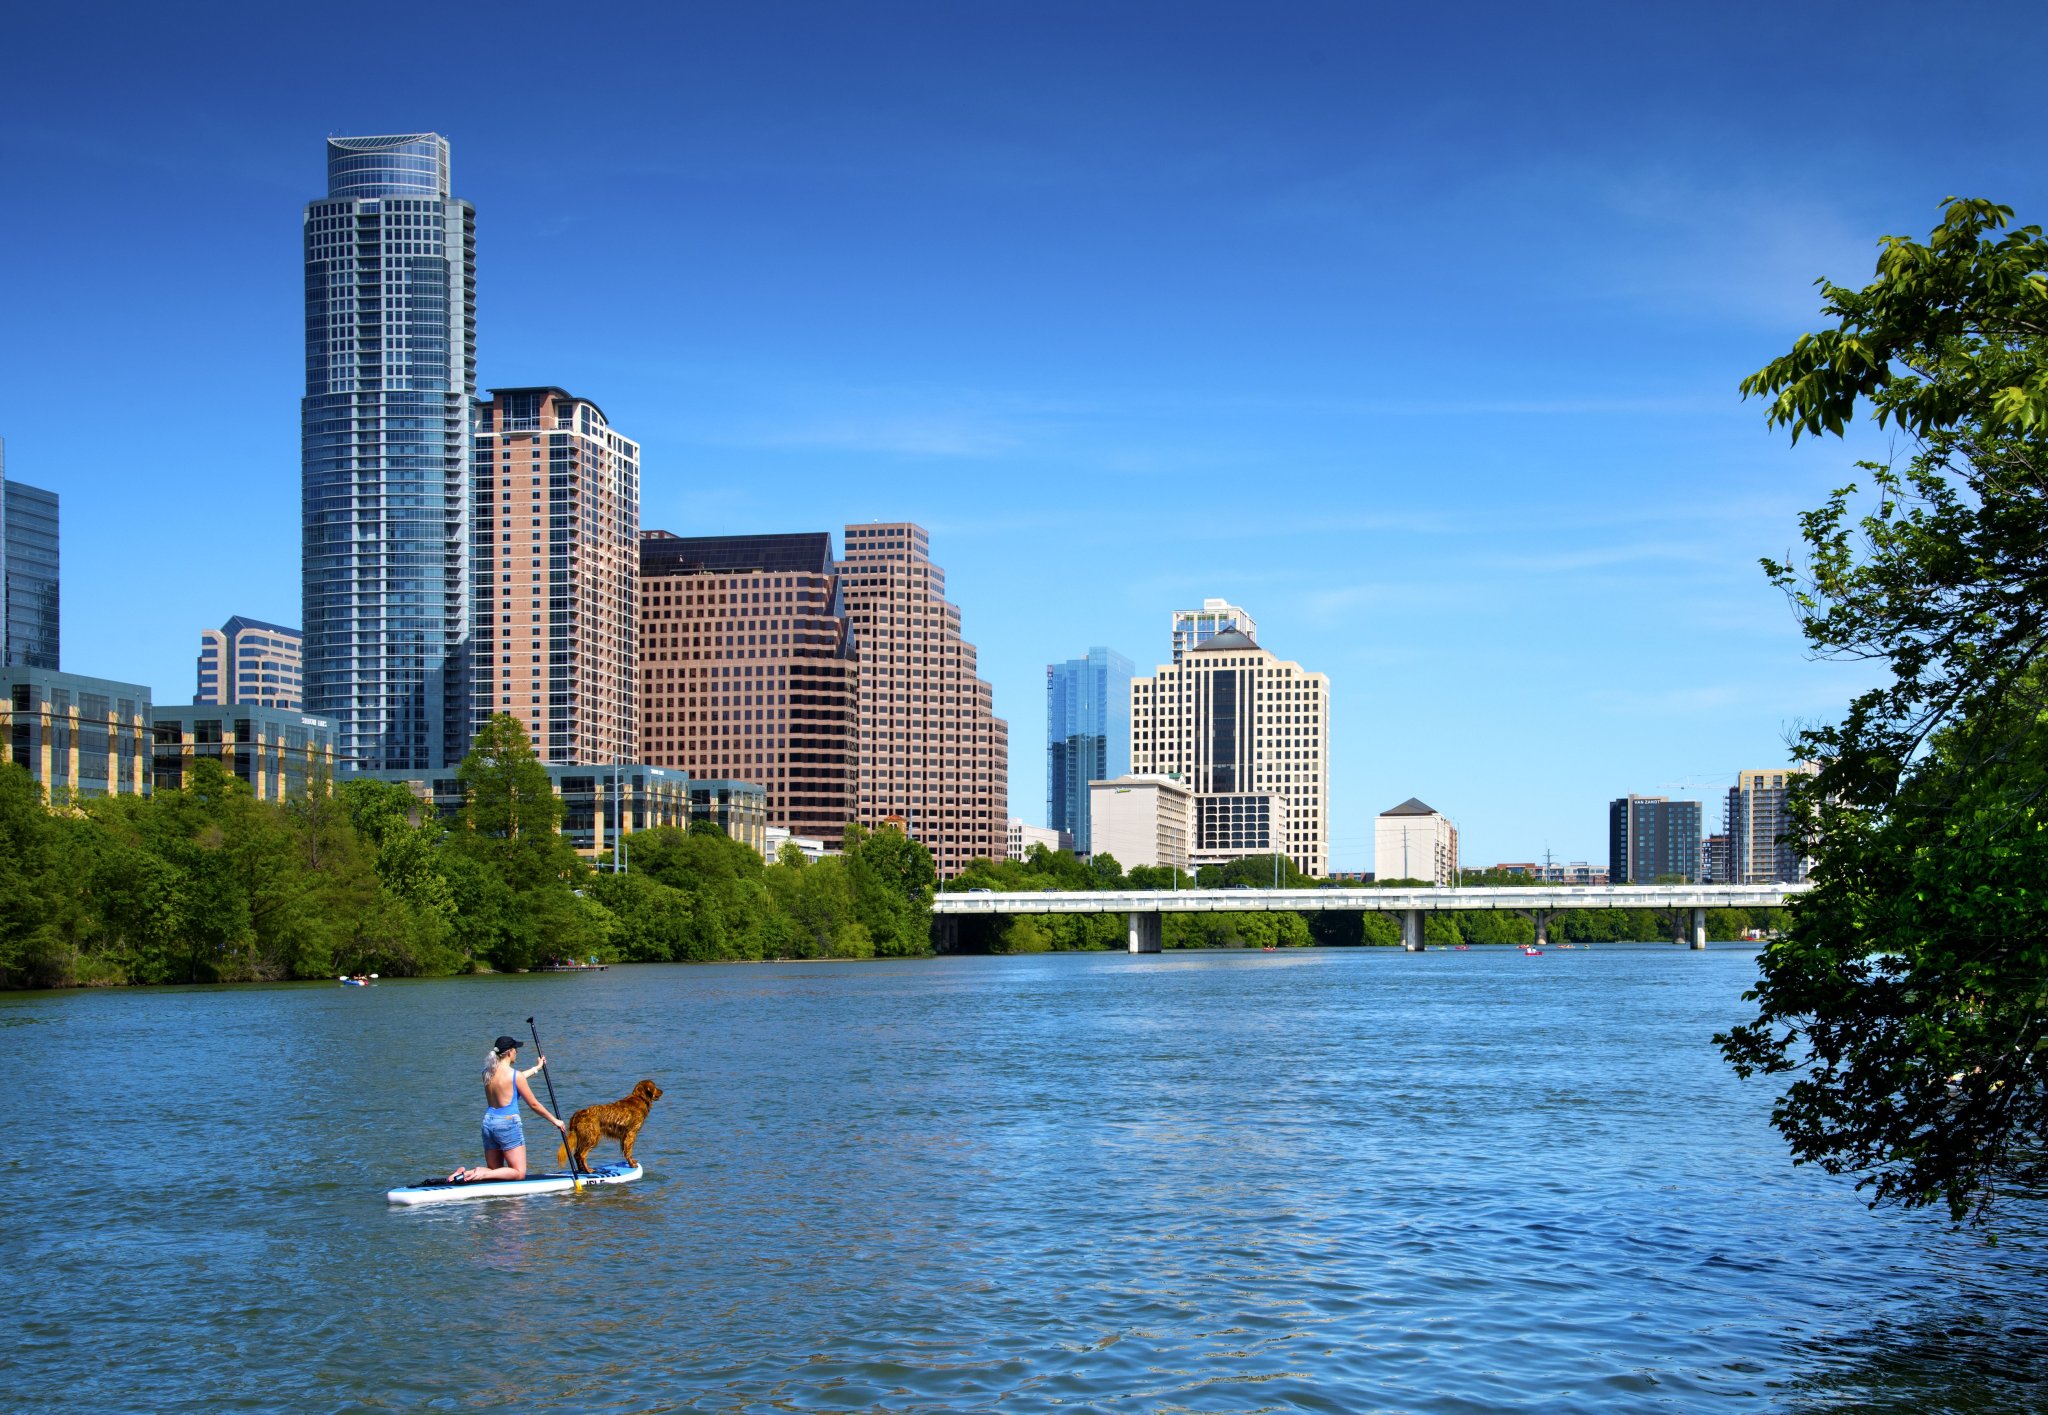 The Top 10 Stand-Up Paddleboarding Destinations in the US